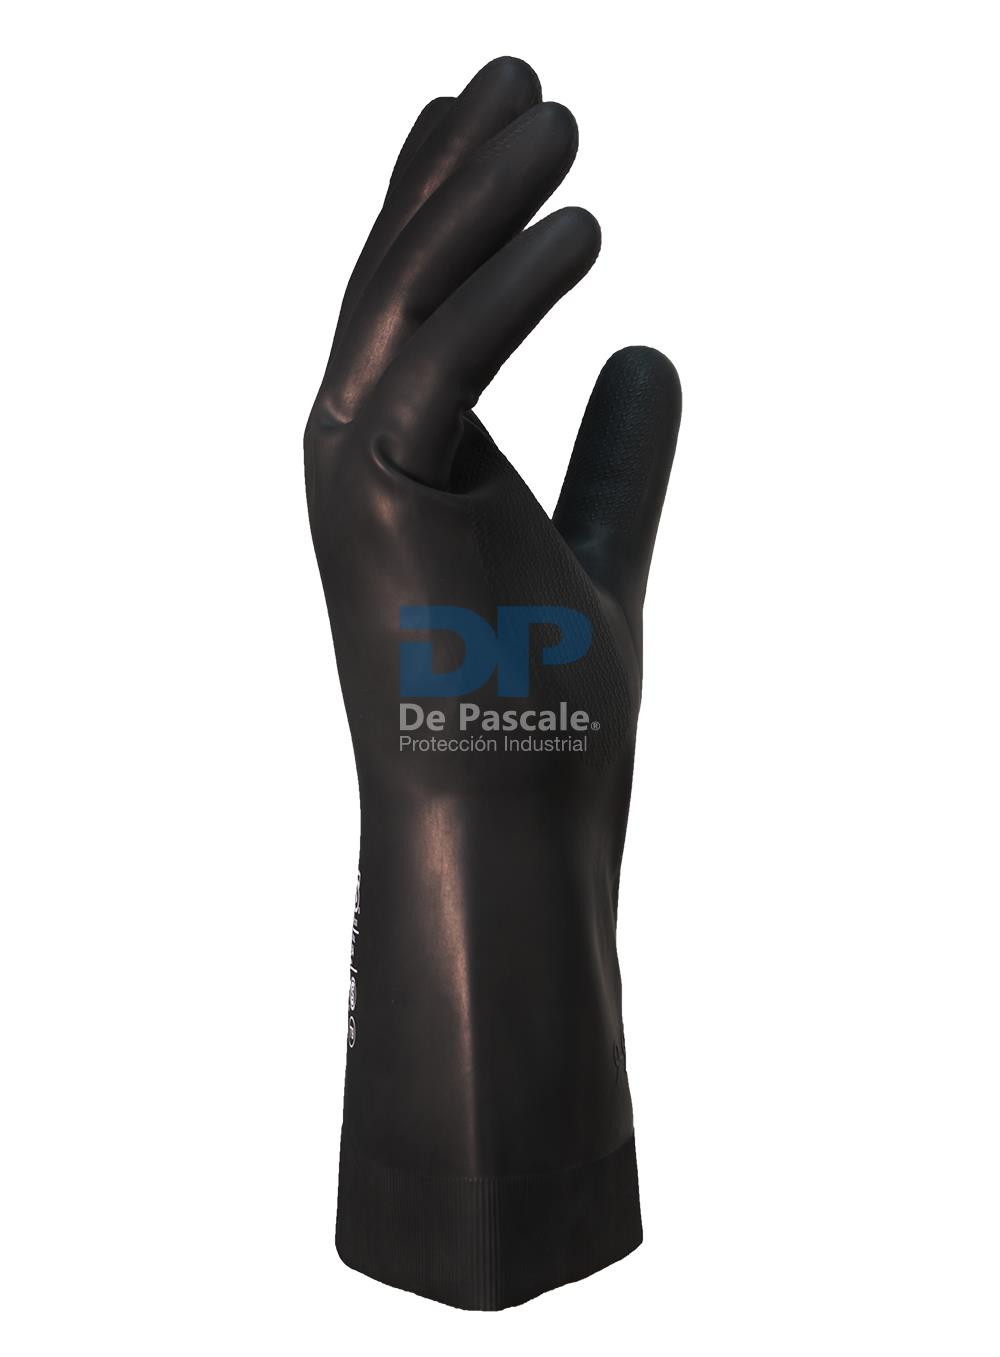 GUANTE LATEX NEGRO DEPASCALE TALLE 9 DPS71394